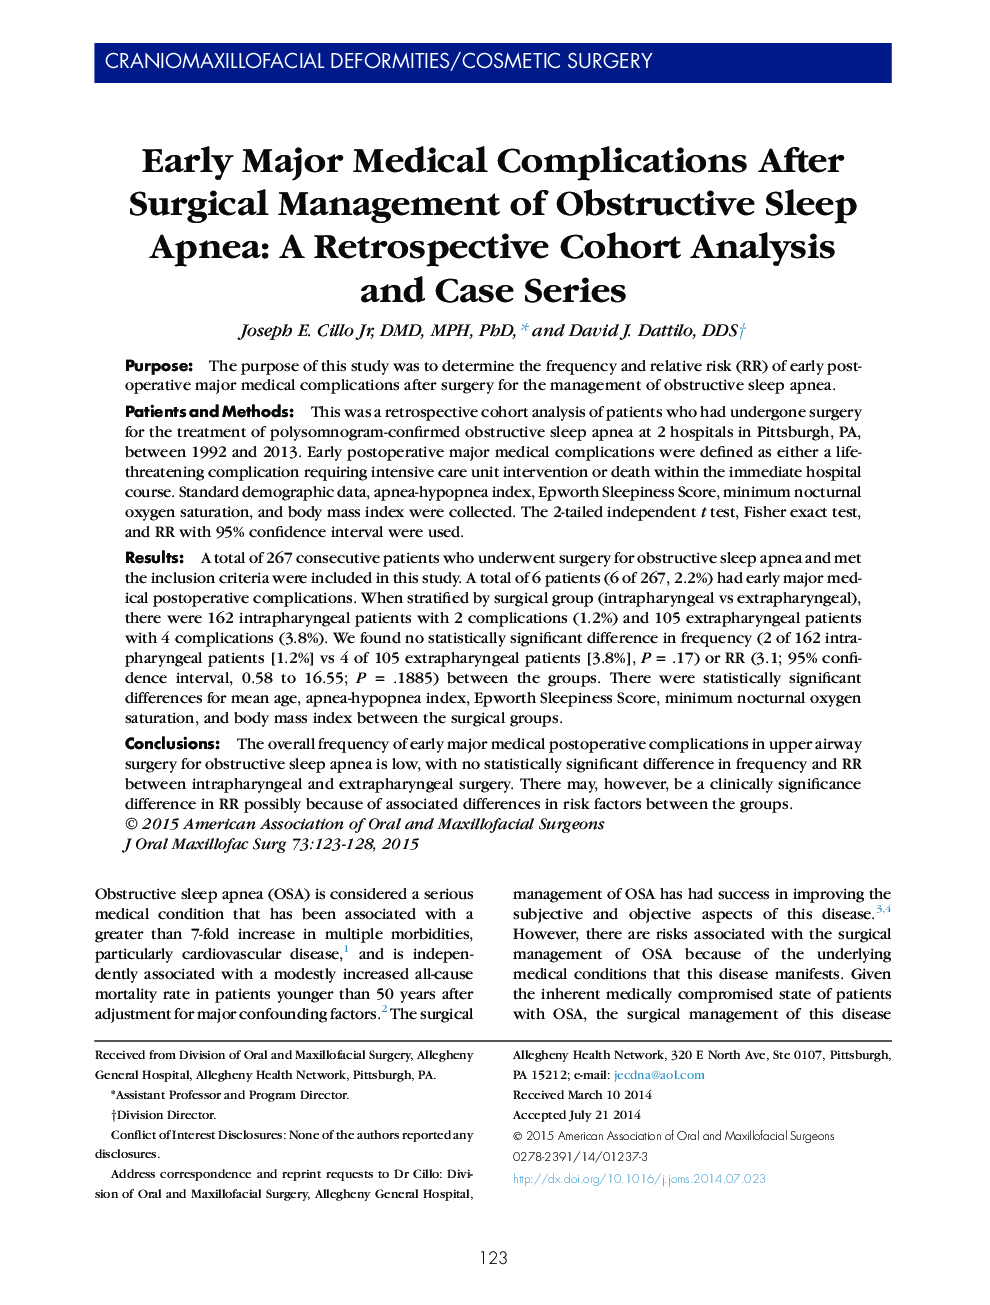 Early Major Medical Complications After Surgical Management of Obstructive Sleep Apnea: A Retrospective Cohort Analysis and Case Series 